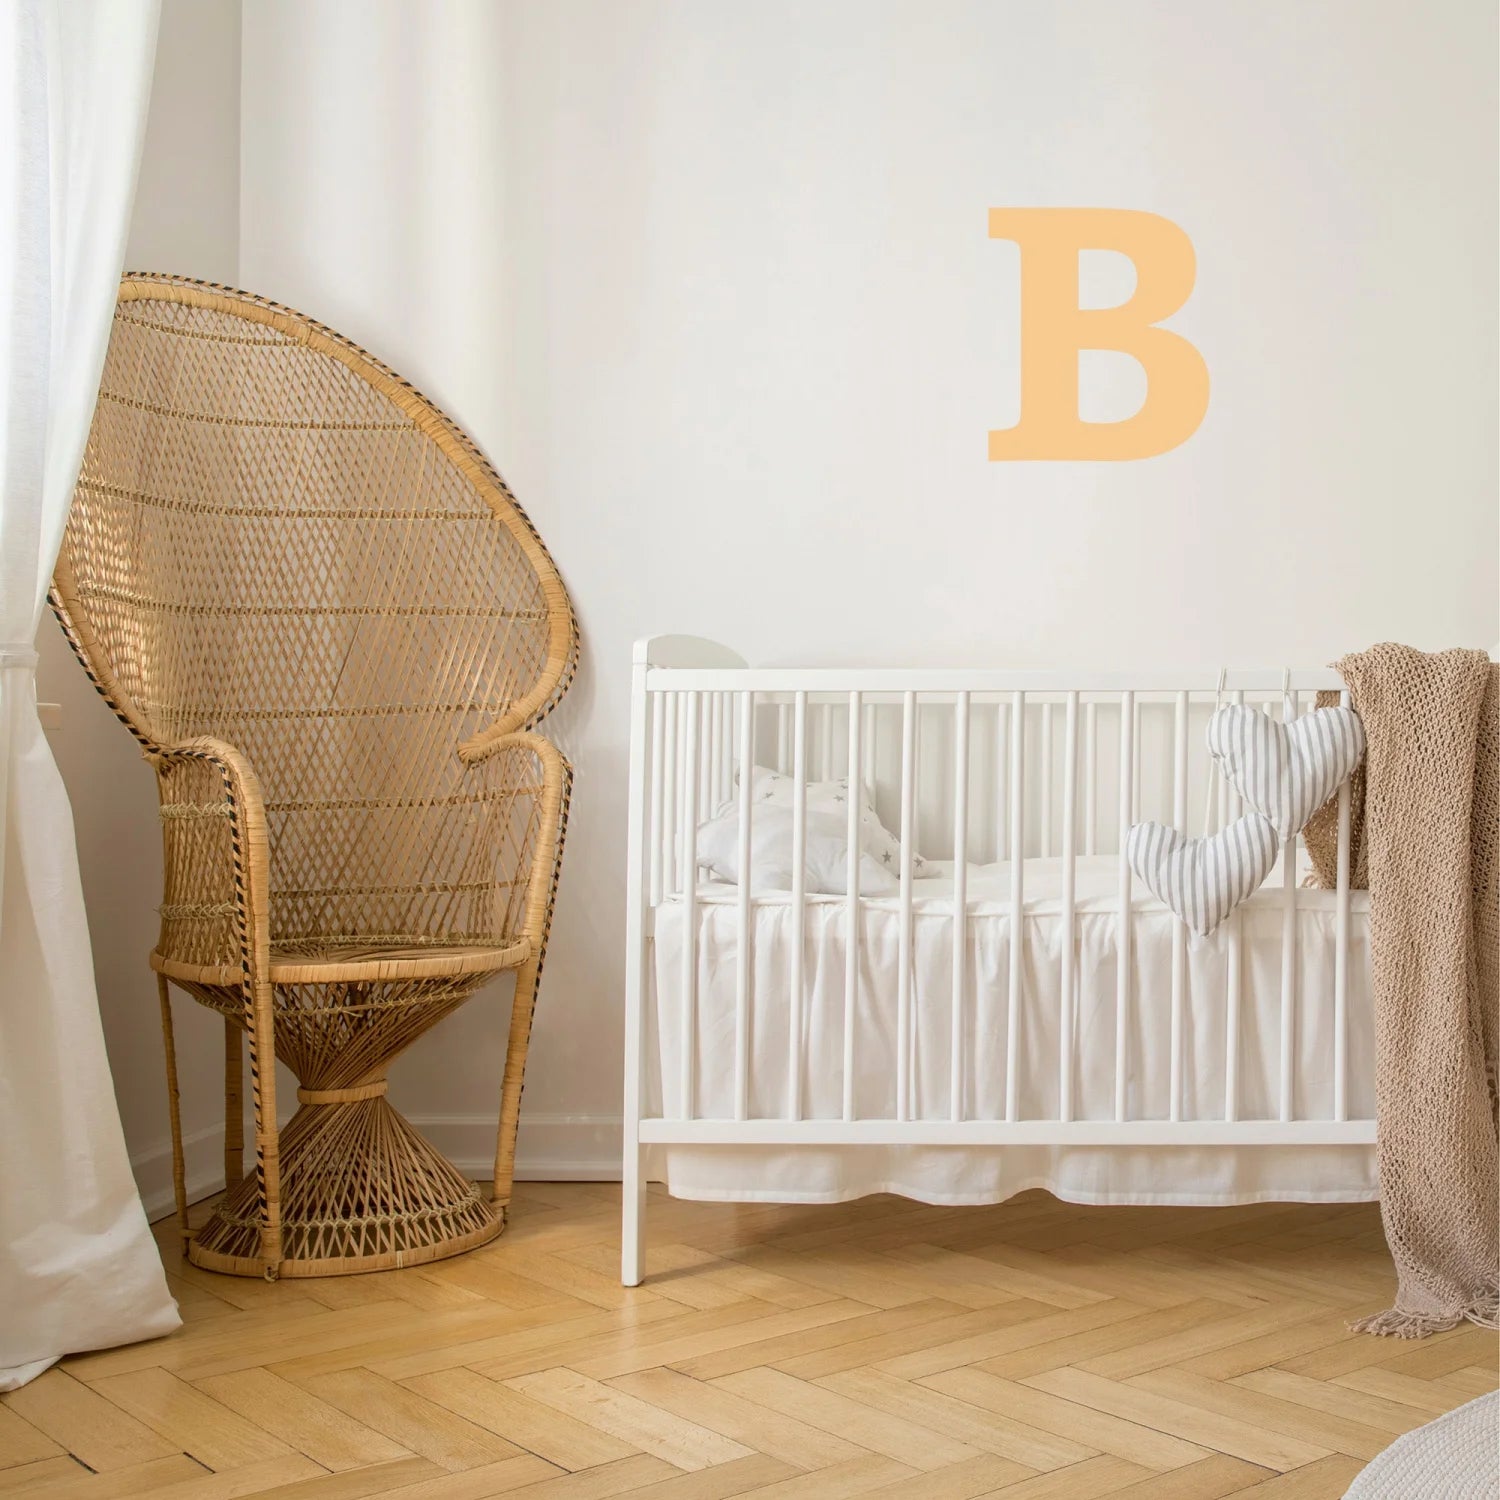 Letter B Initial Decal - Decals - Initials